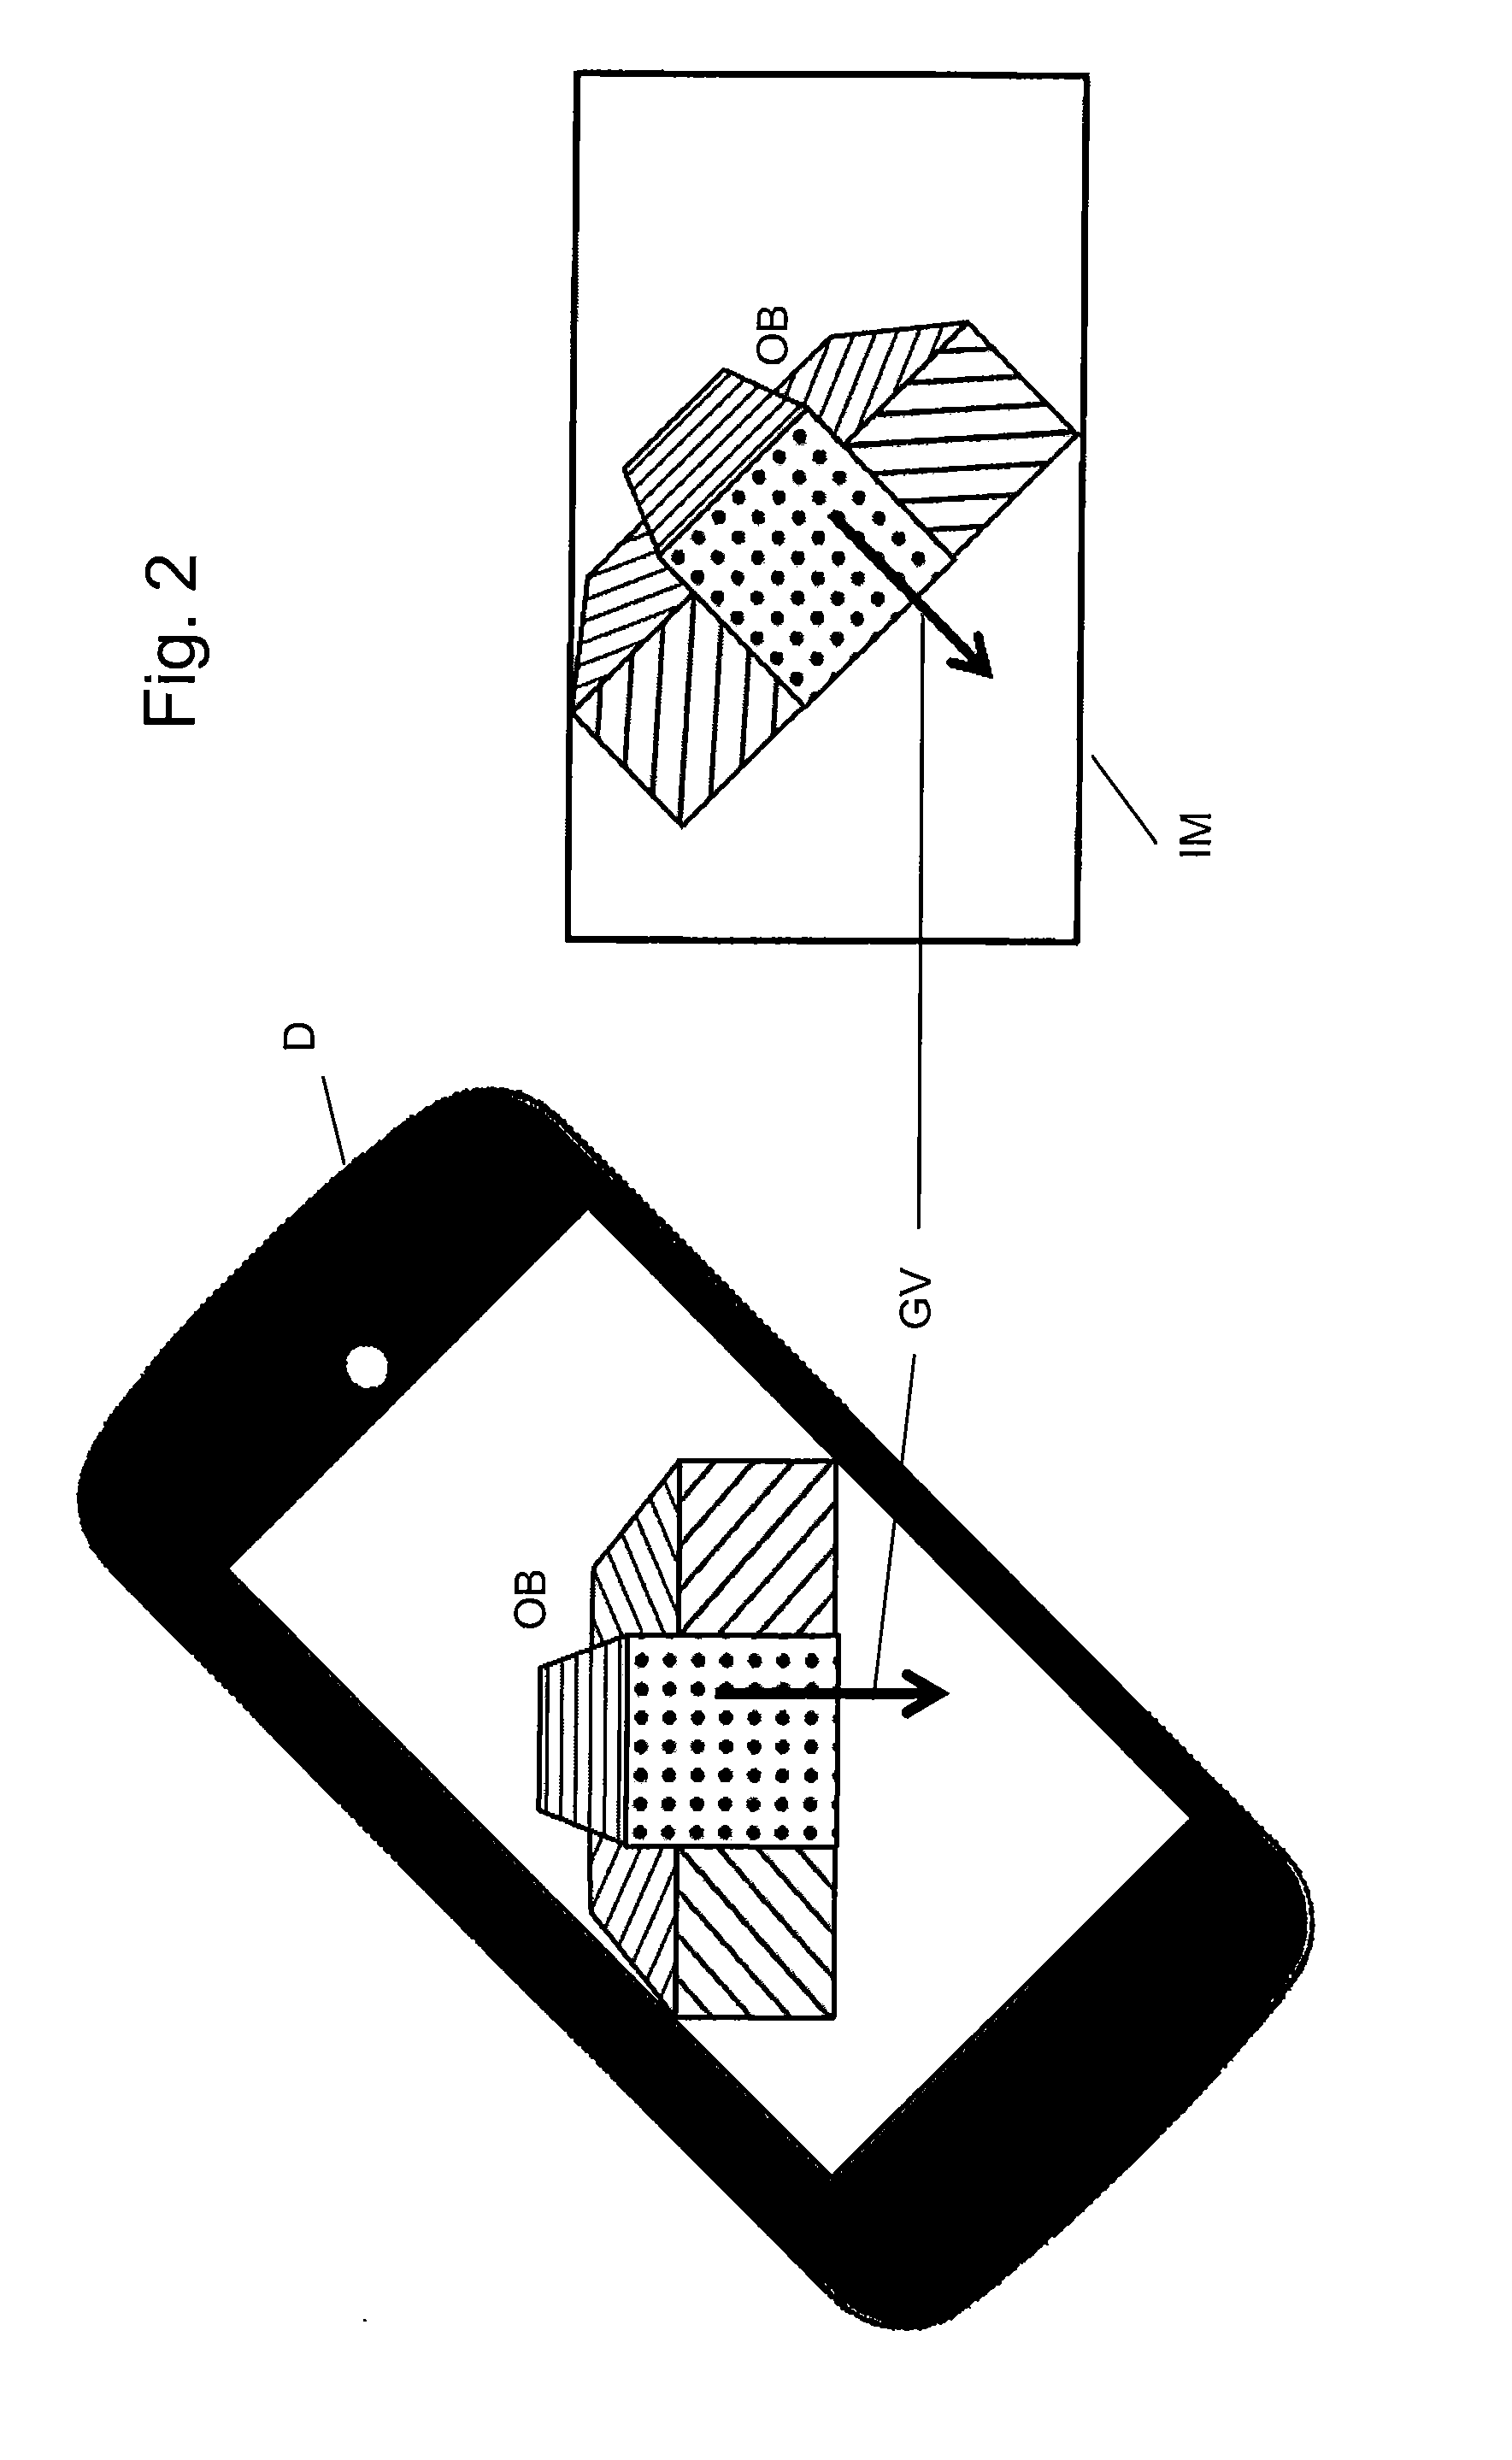 Image processing method, particularly used in a vision-based localization of a device